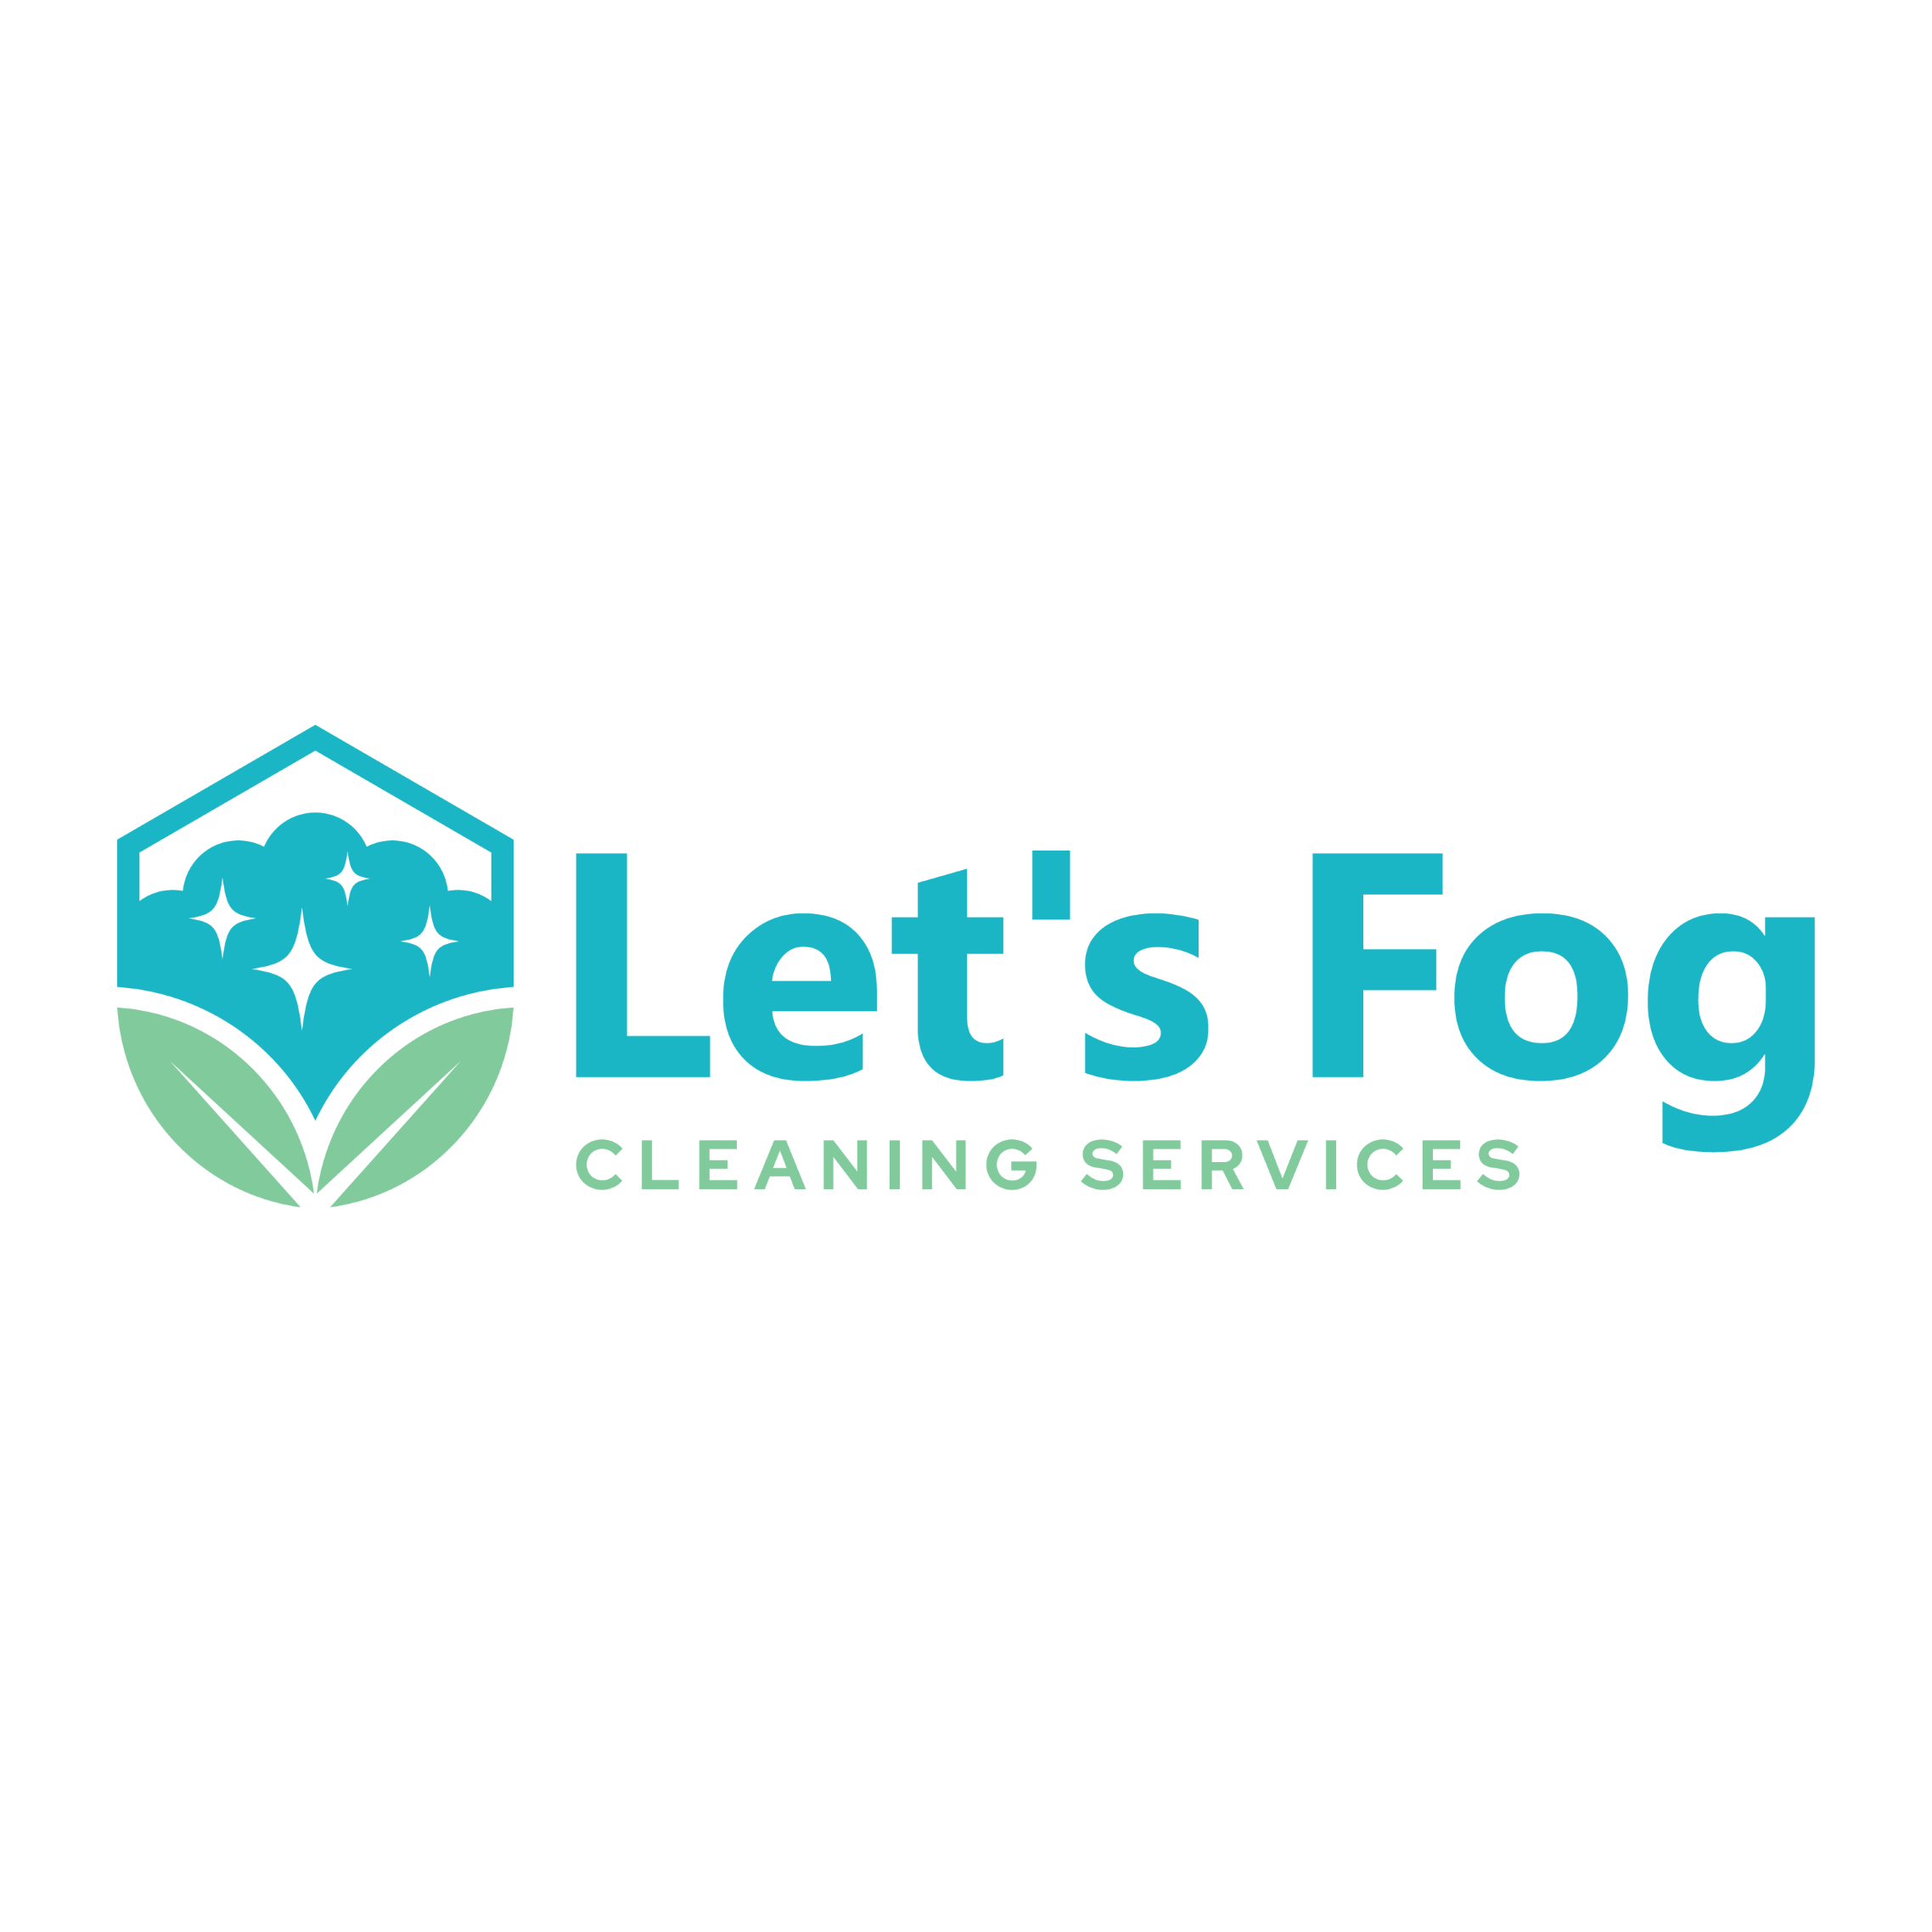 Let's Fog Cleaning Services